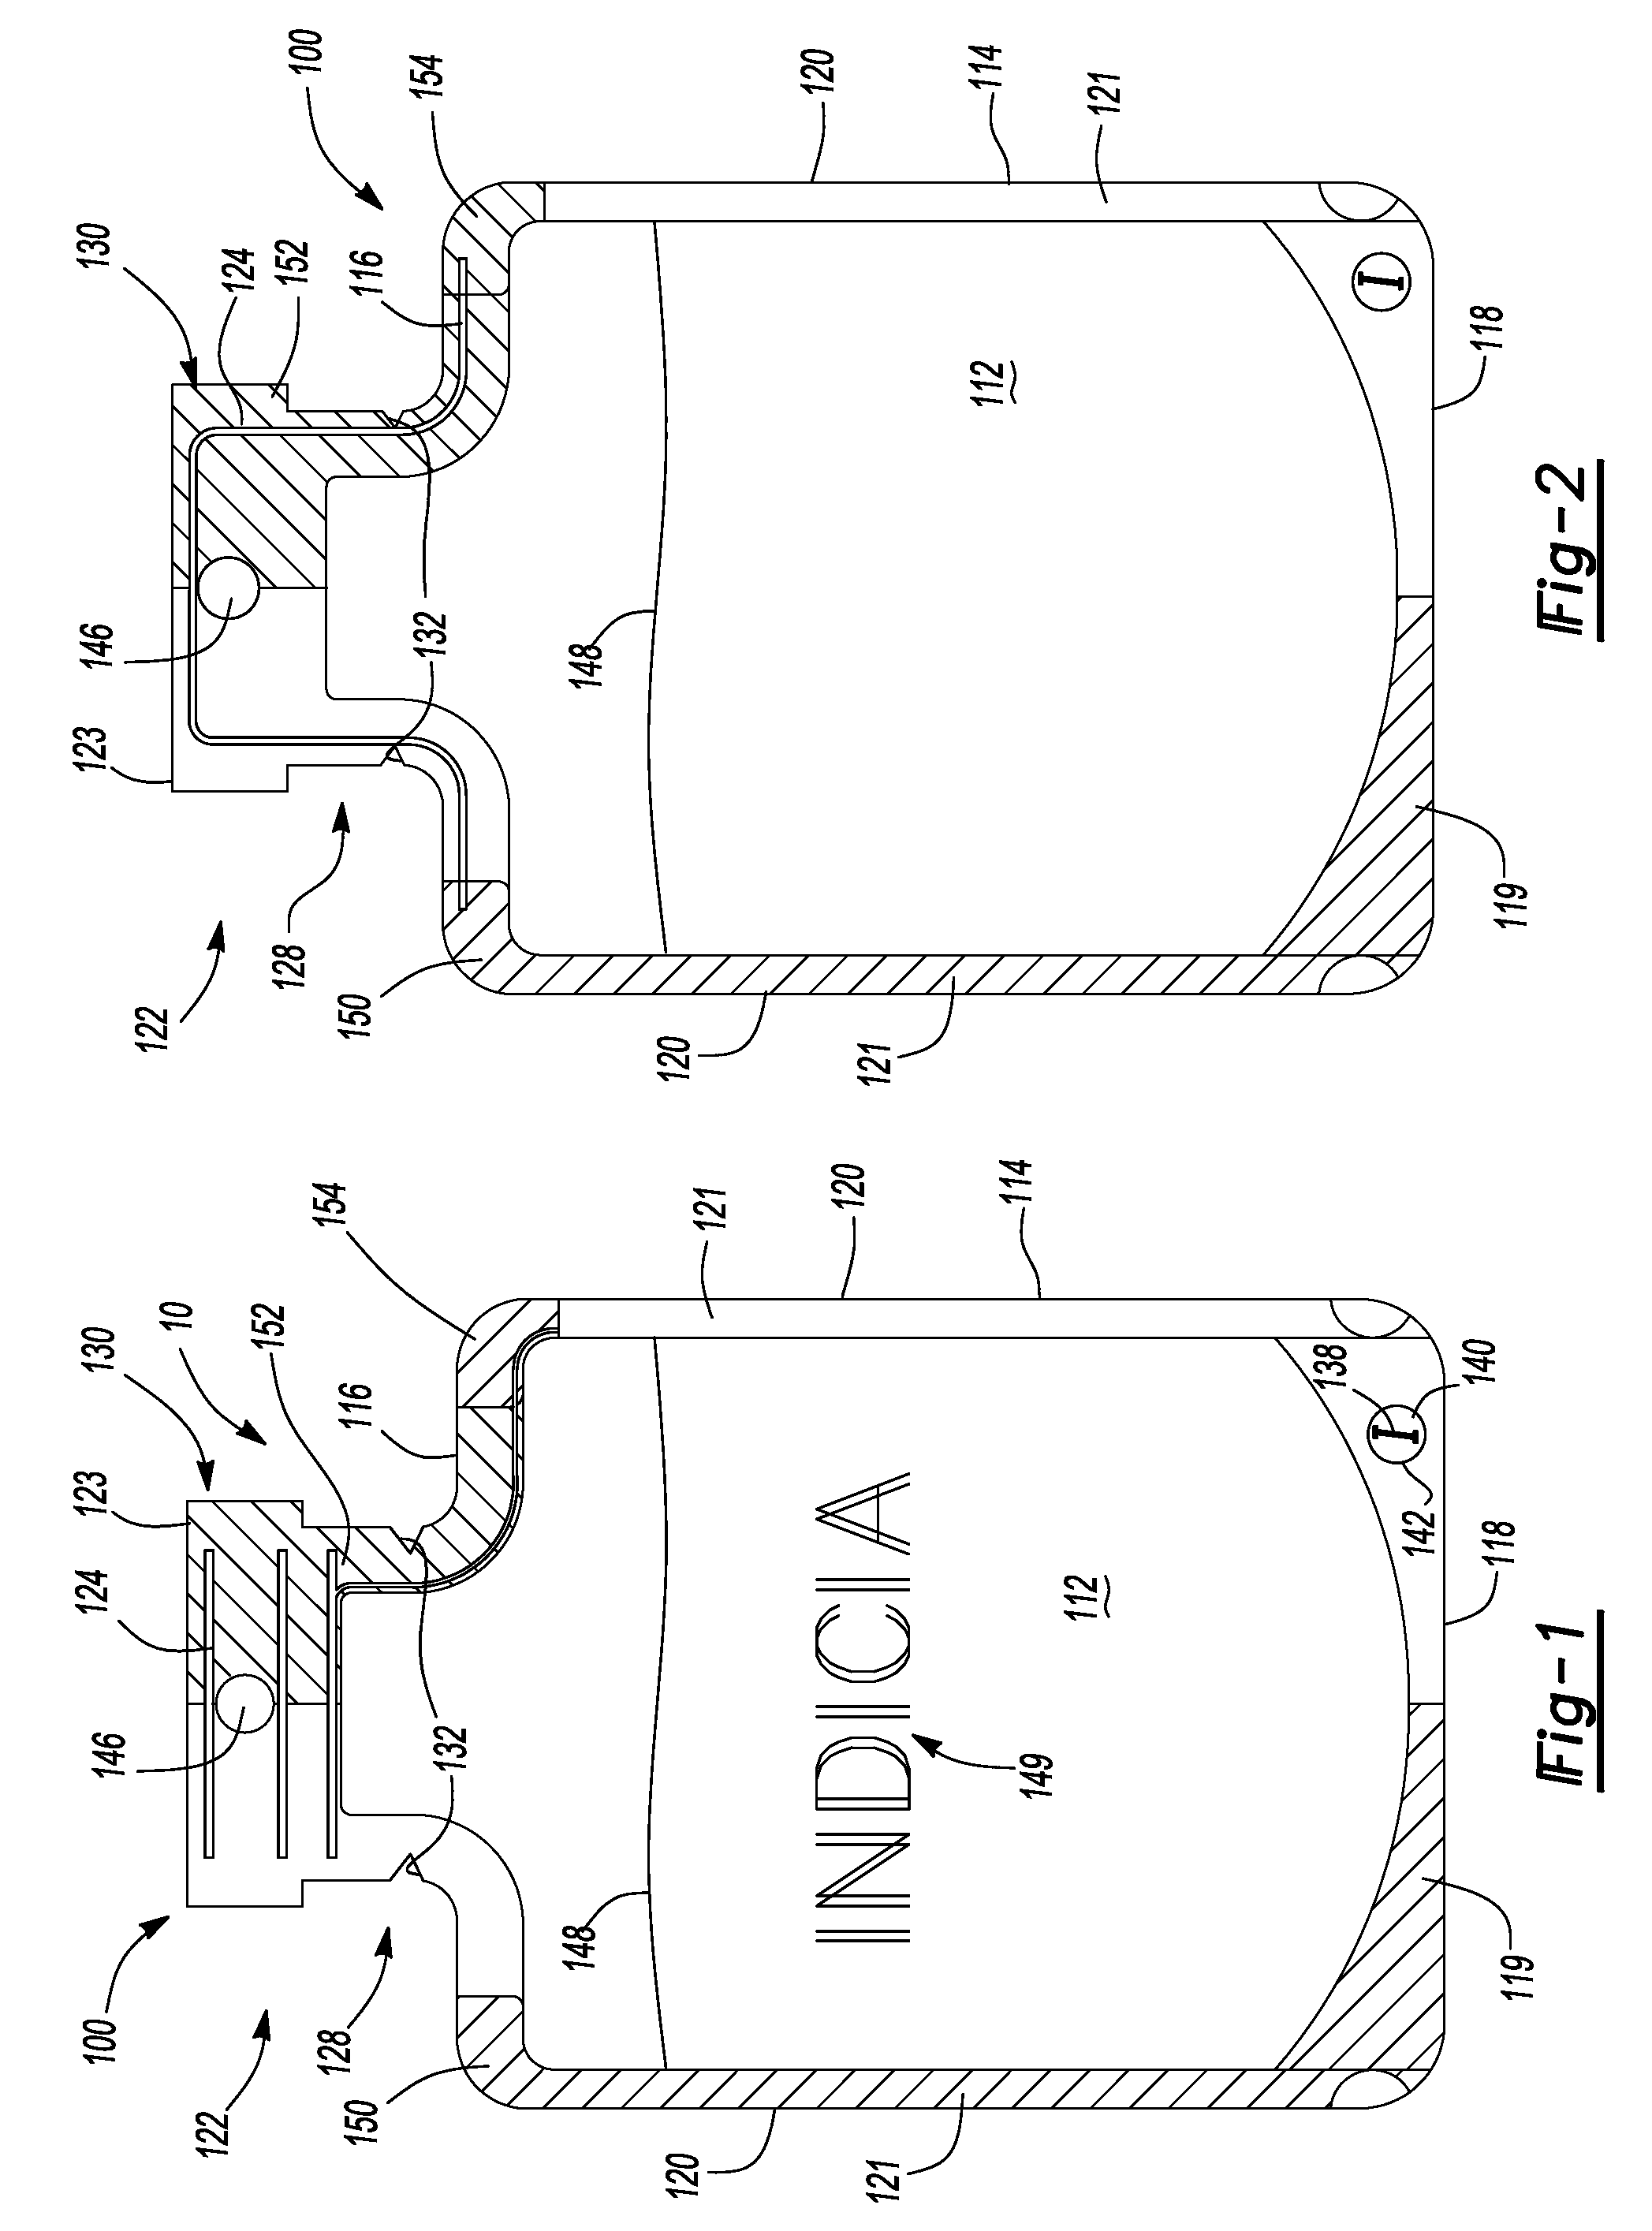 Shaped Flexible Pouch With Elongated Neck And Method Of Manufacture